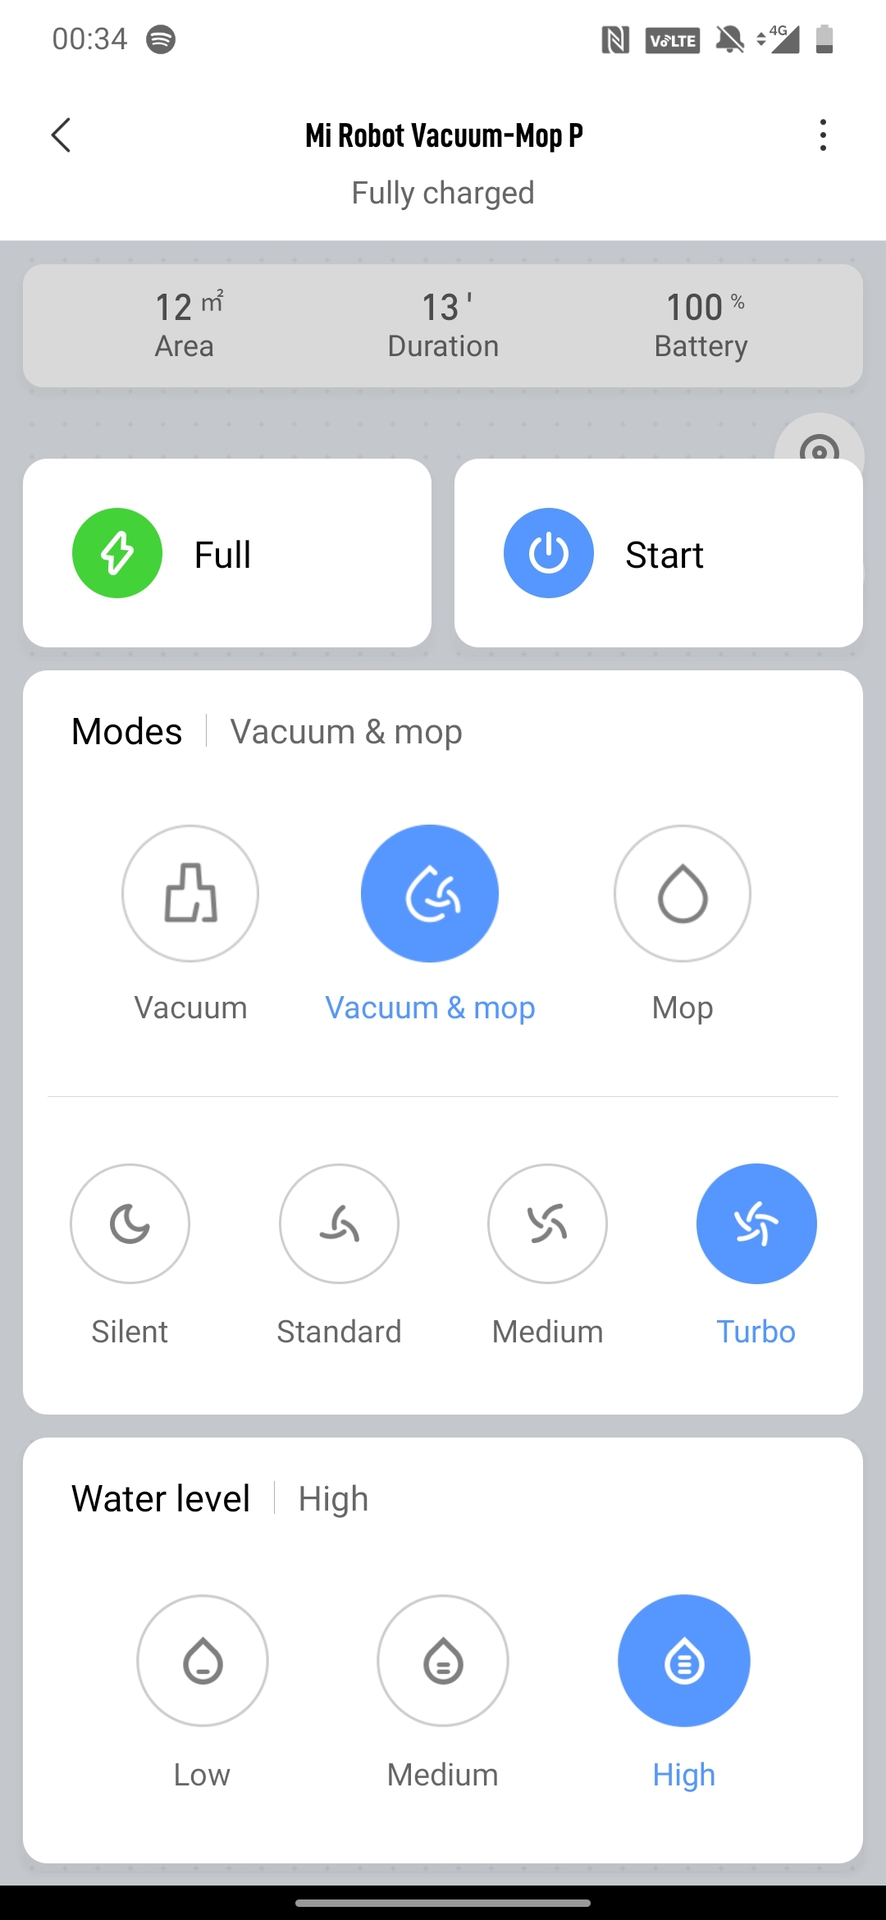 Mi Robot Vacuum P map page home settings